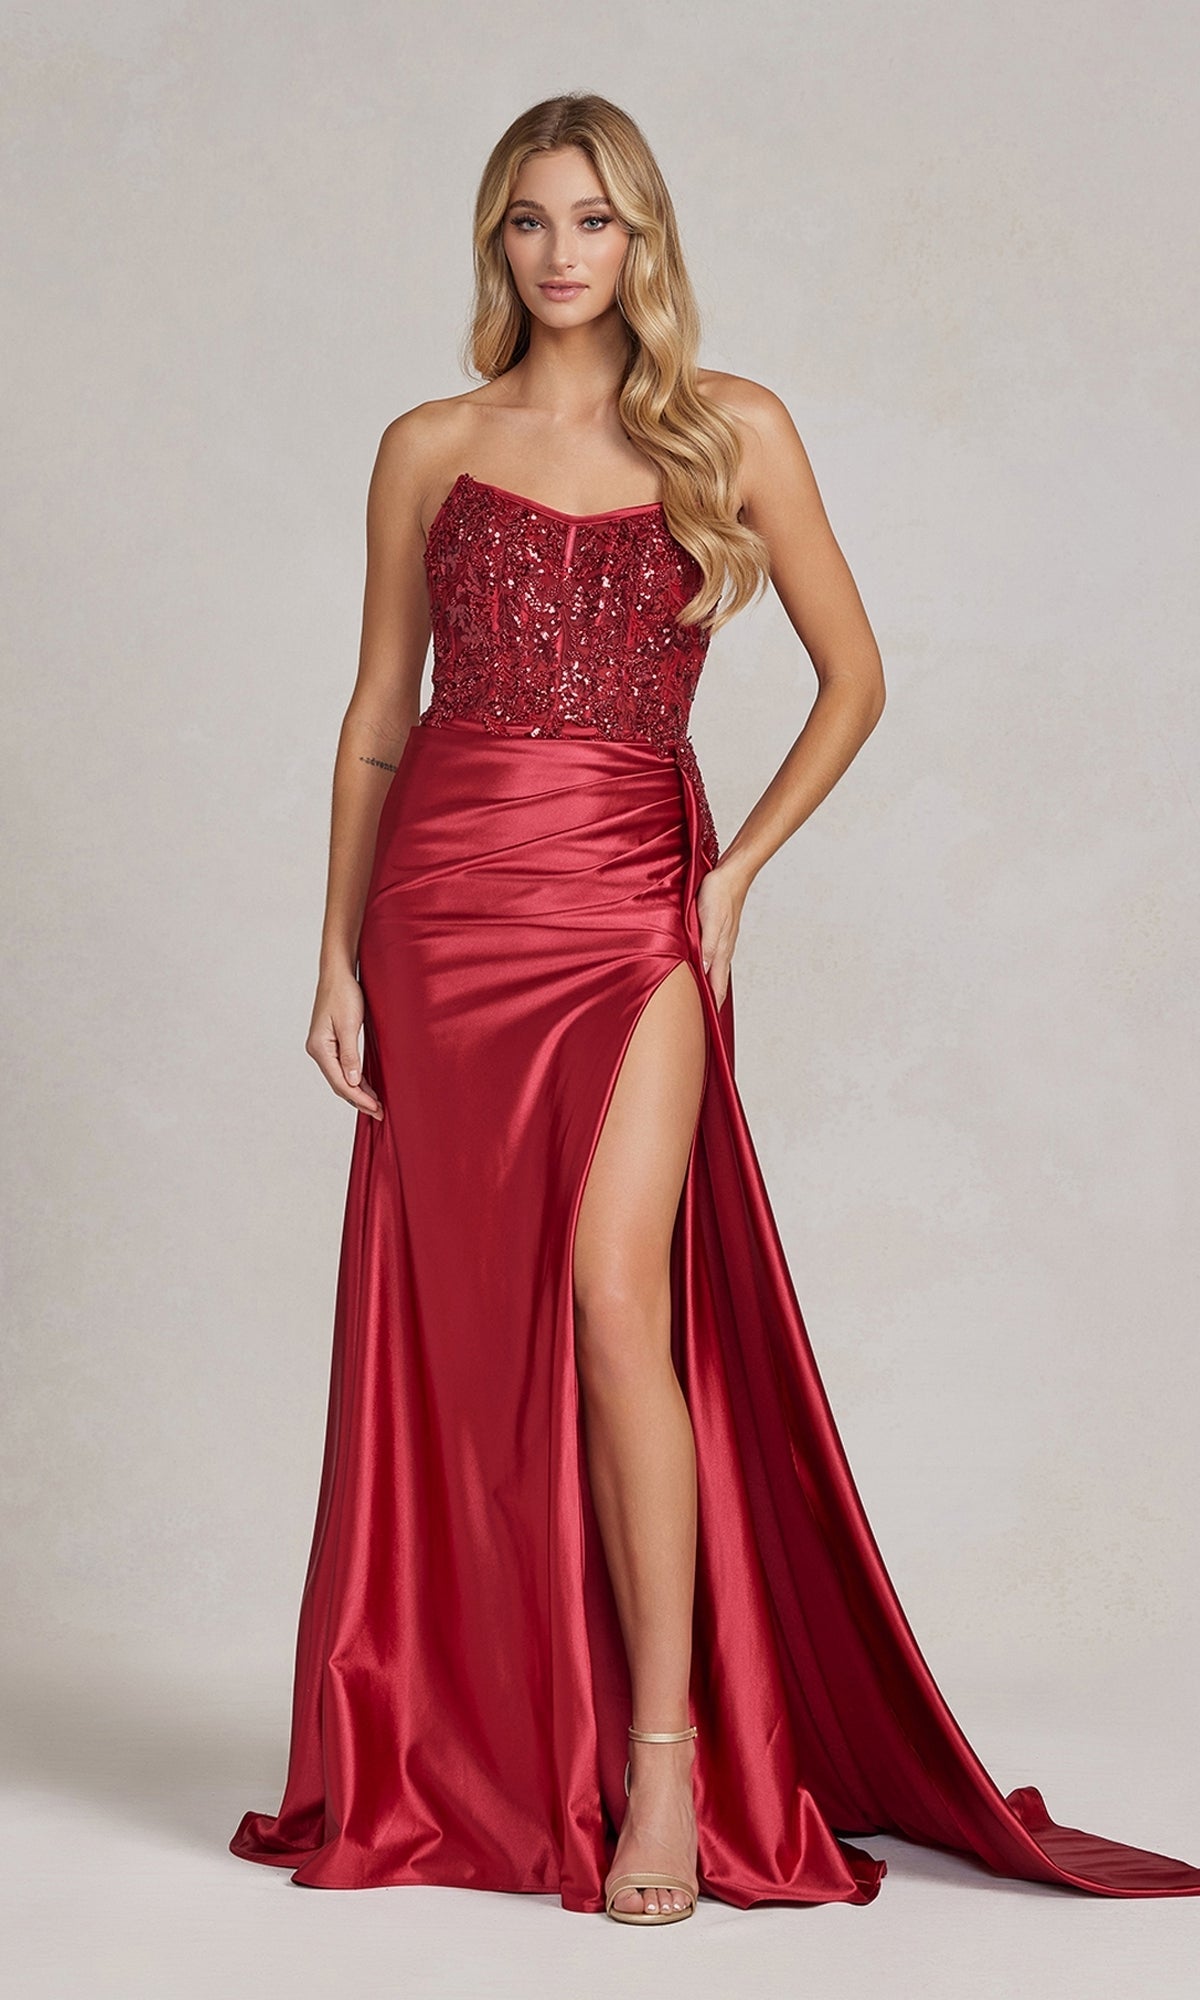  Strapless Long Prom Dress with Side Train